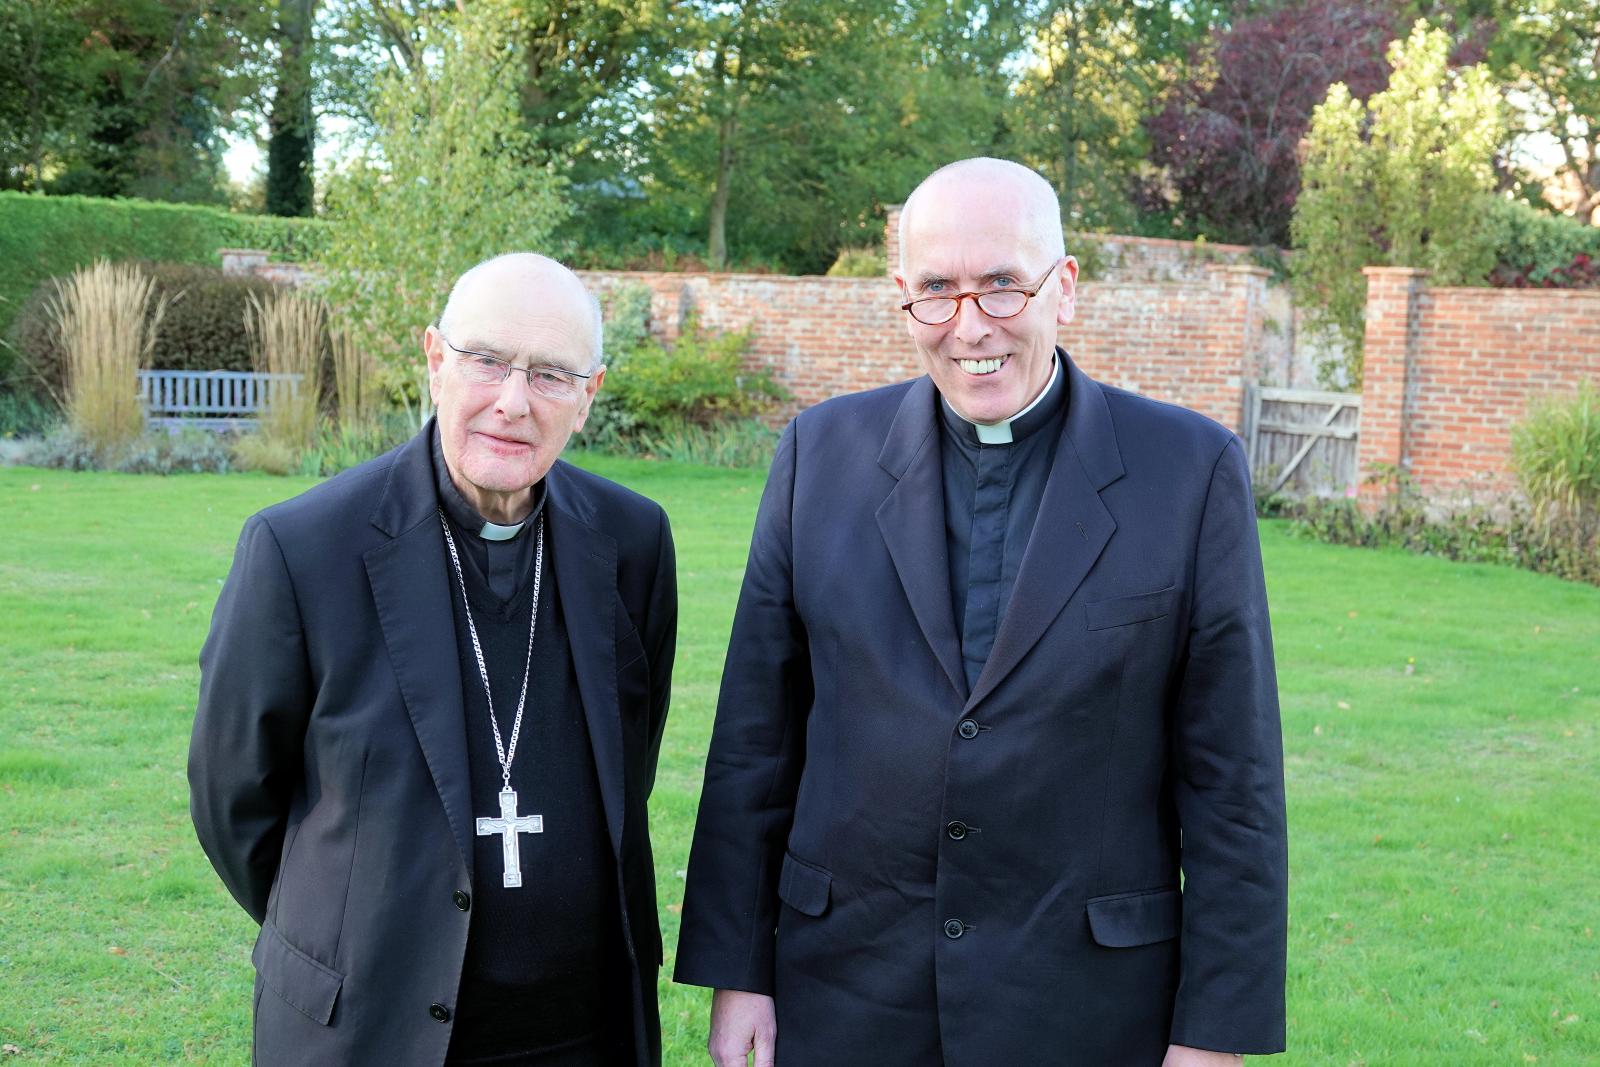 Cardinal welcomes appointment of new Bishop for East Anglia - Diocese of Westminster